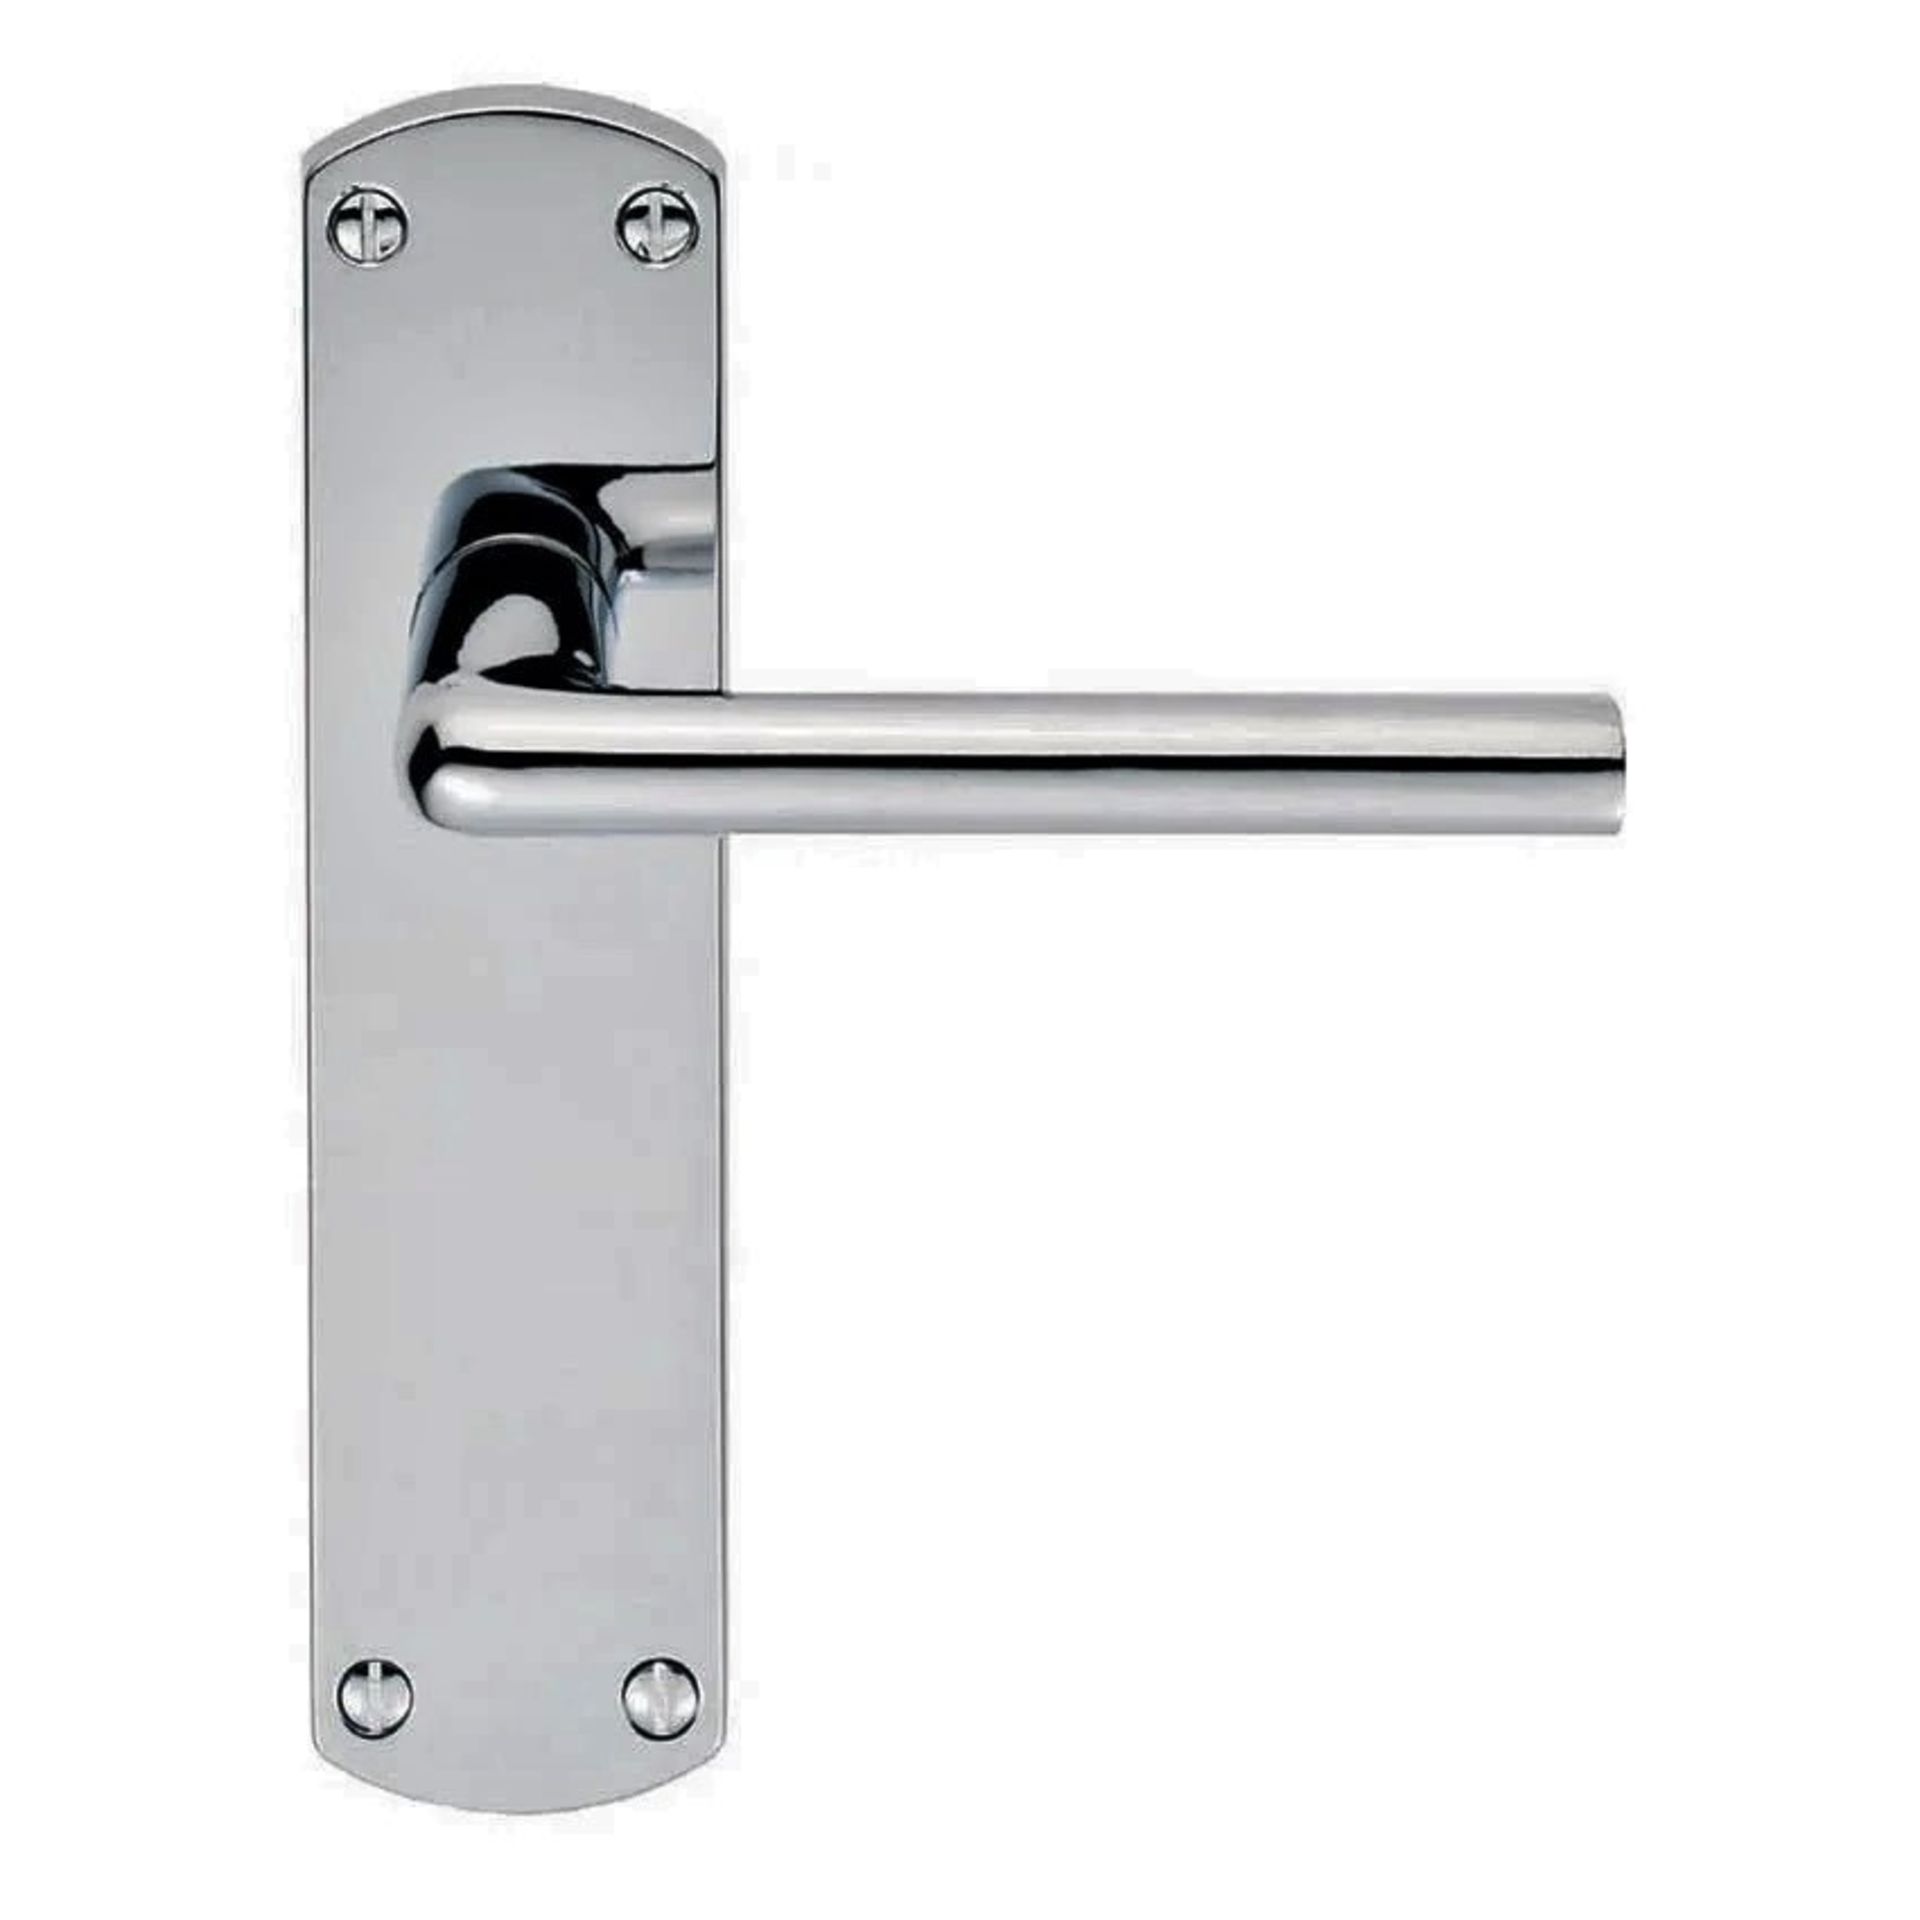 2 x Pairs Serozzetta Internal Door Handle Levers on Backplates in Polished Chrome - Brand New